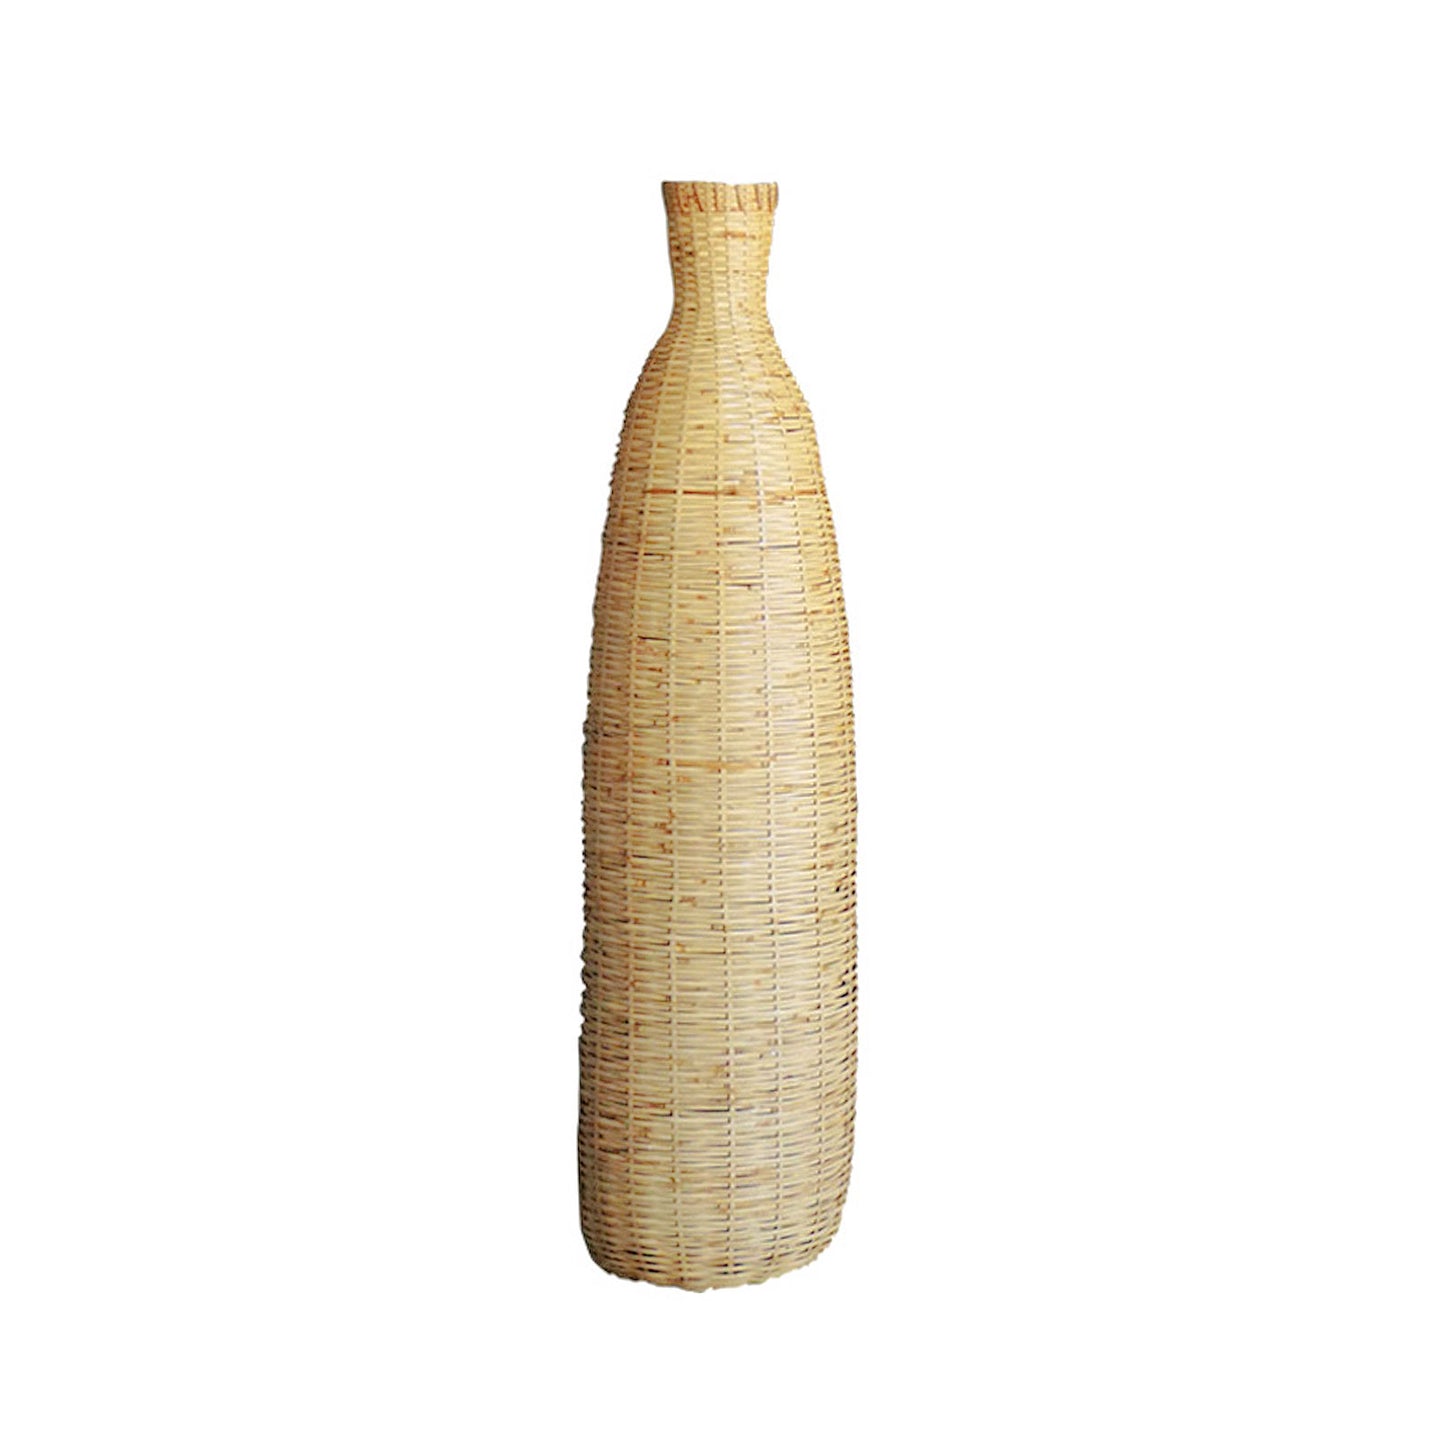 Handmade Woven Bamboo Object (Pick Up Only)